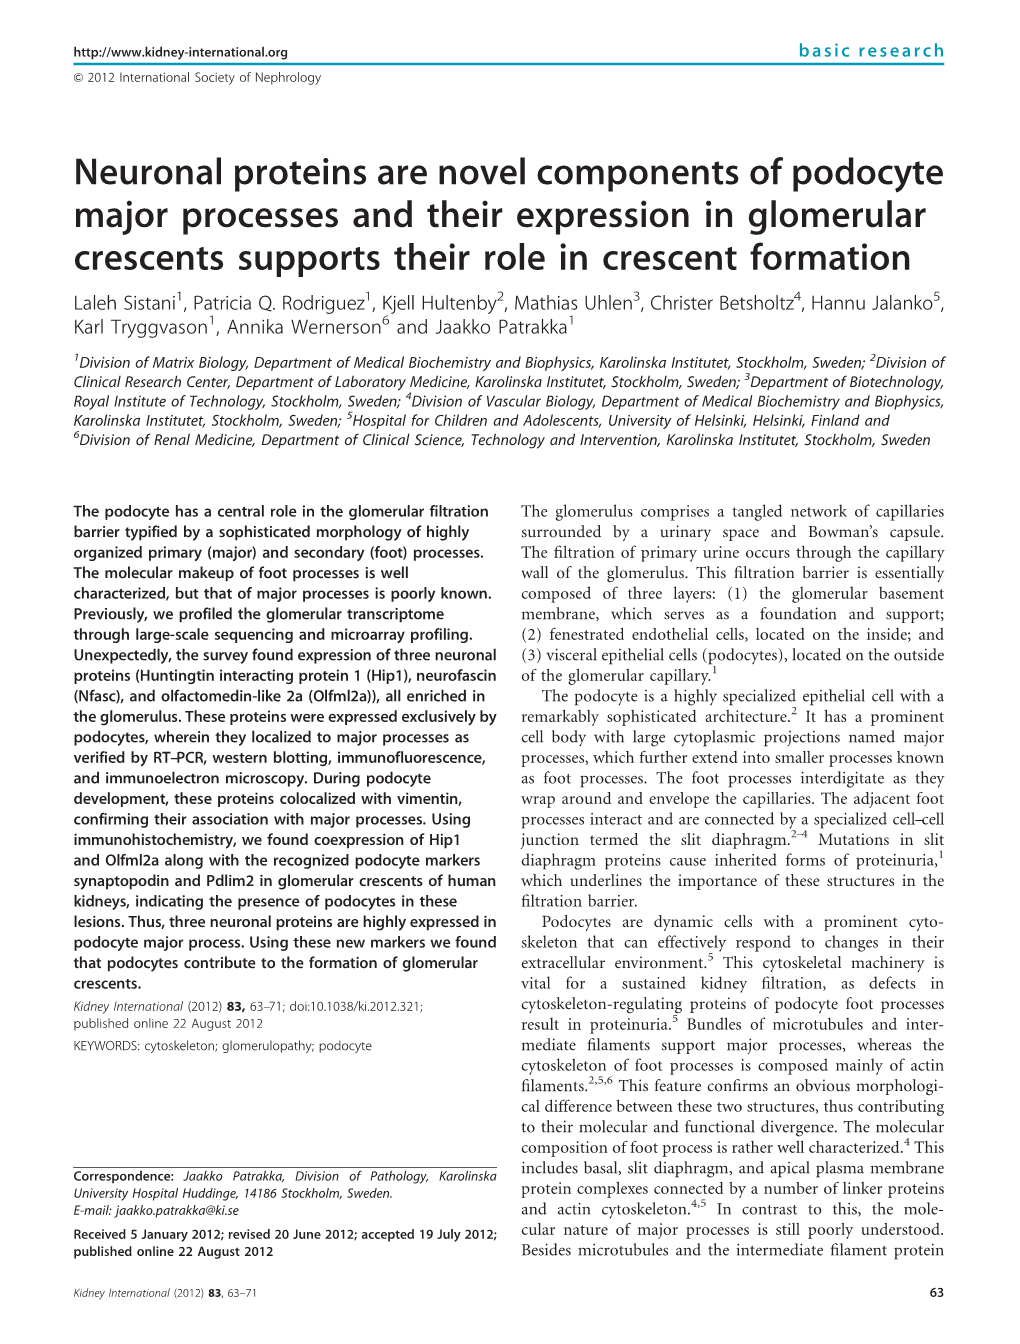 Neuronal Proteins Are Novel Components of Podocyte Major Processes and Their Expression in Glomerular Crescents Supports Their R